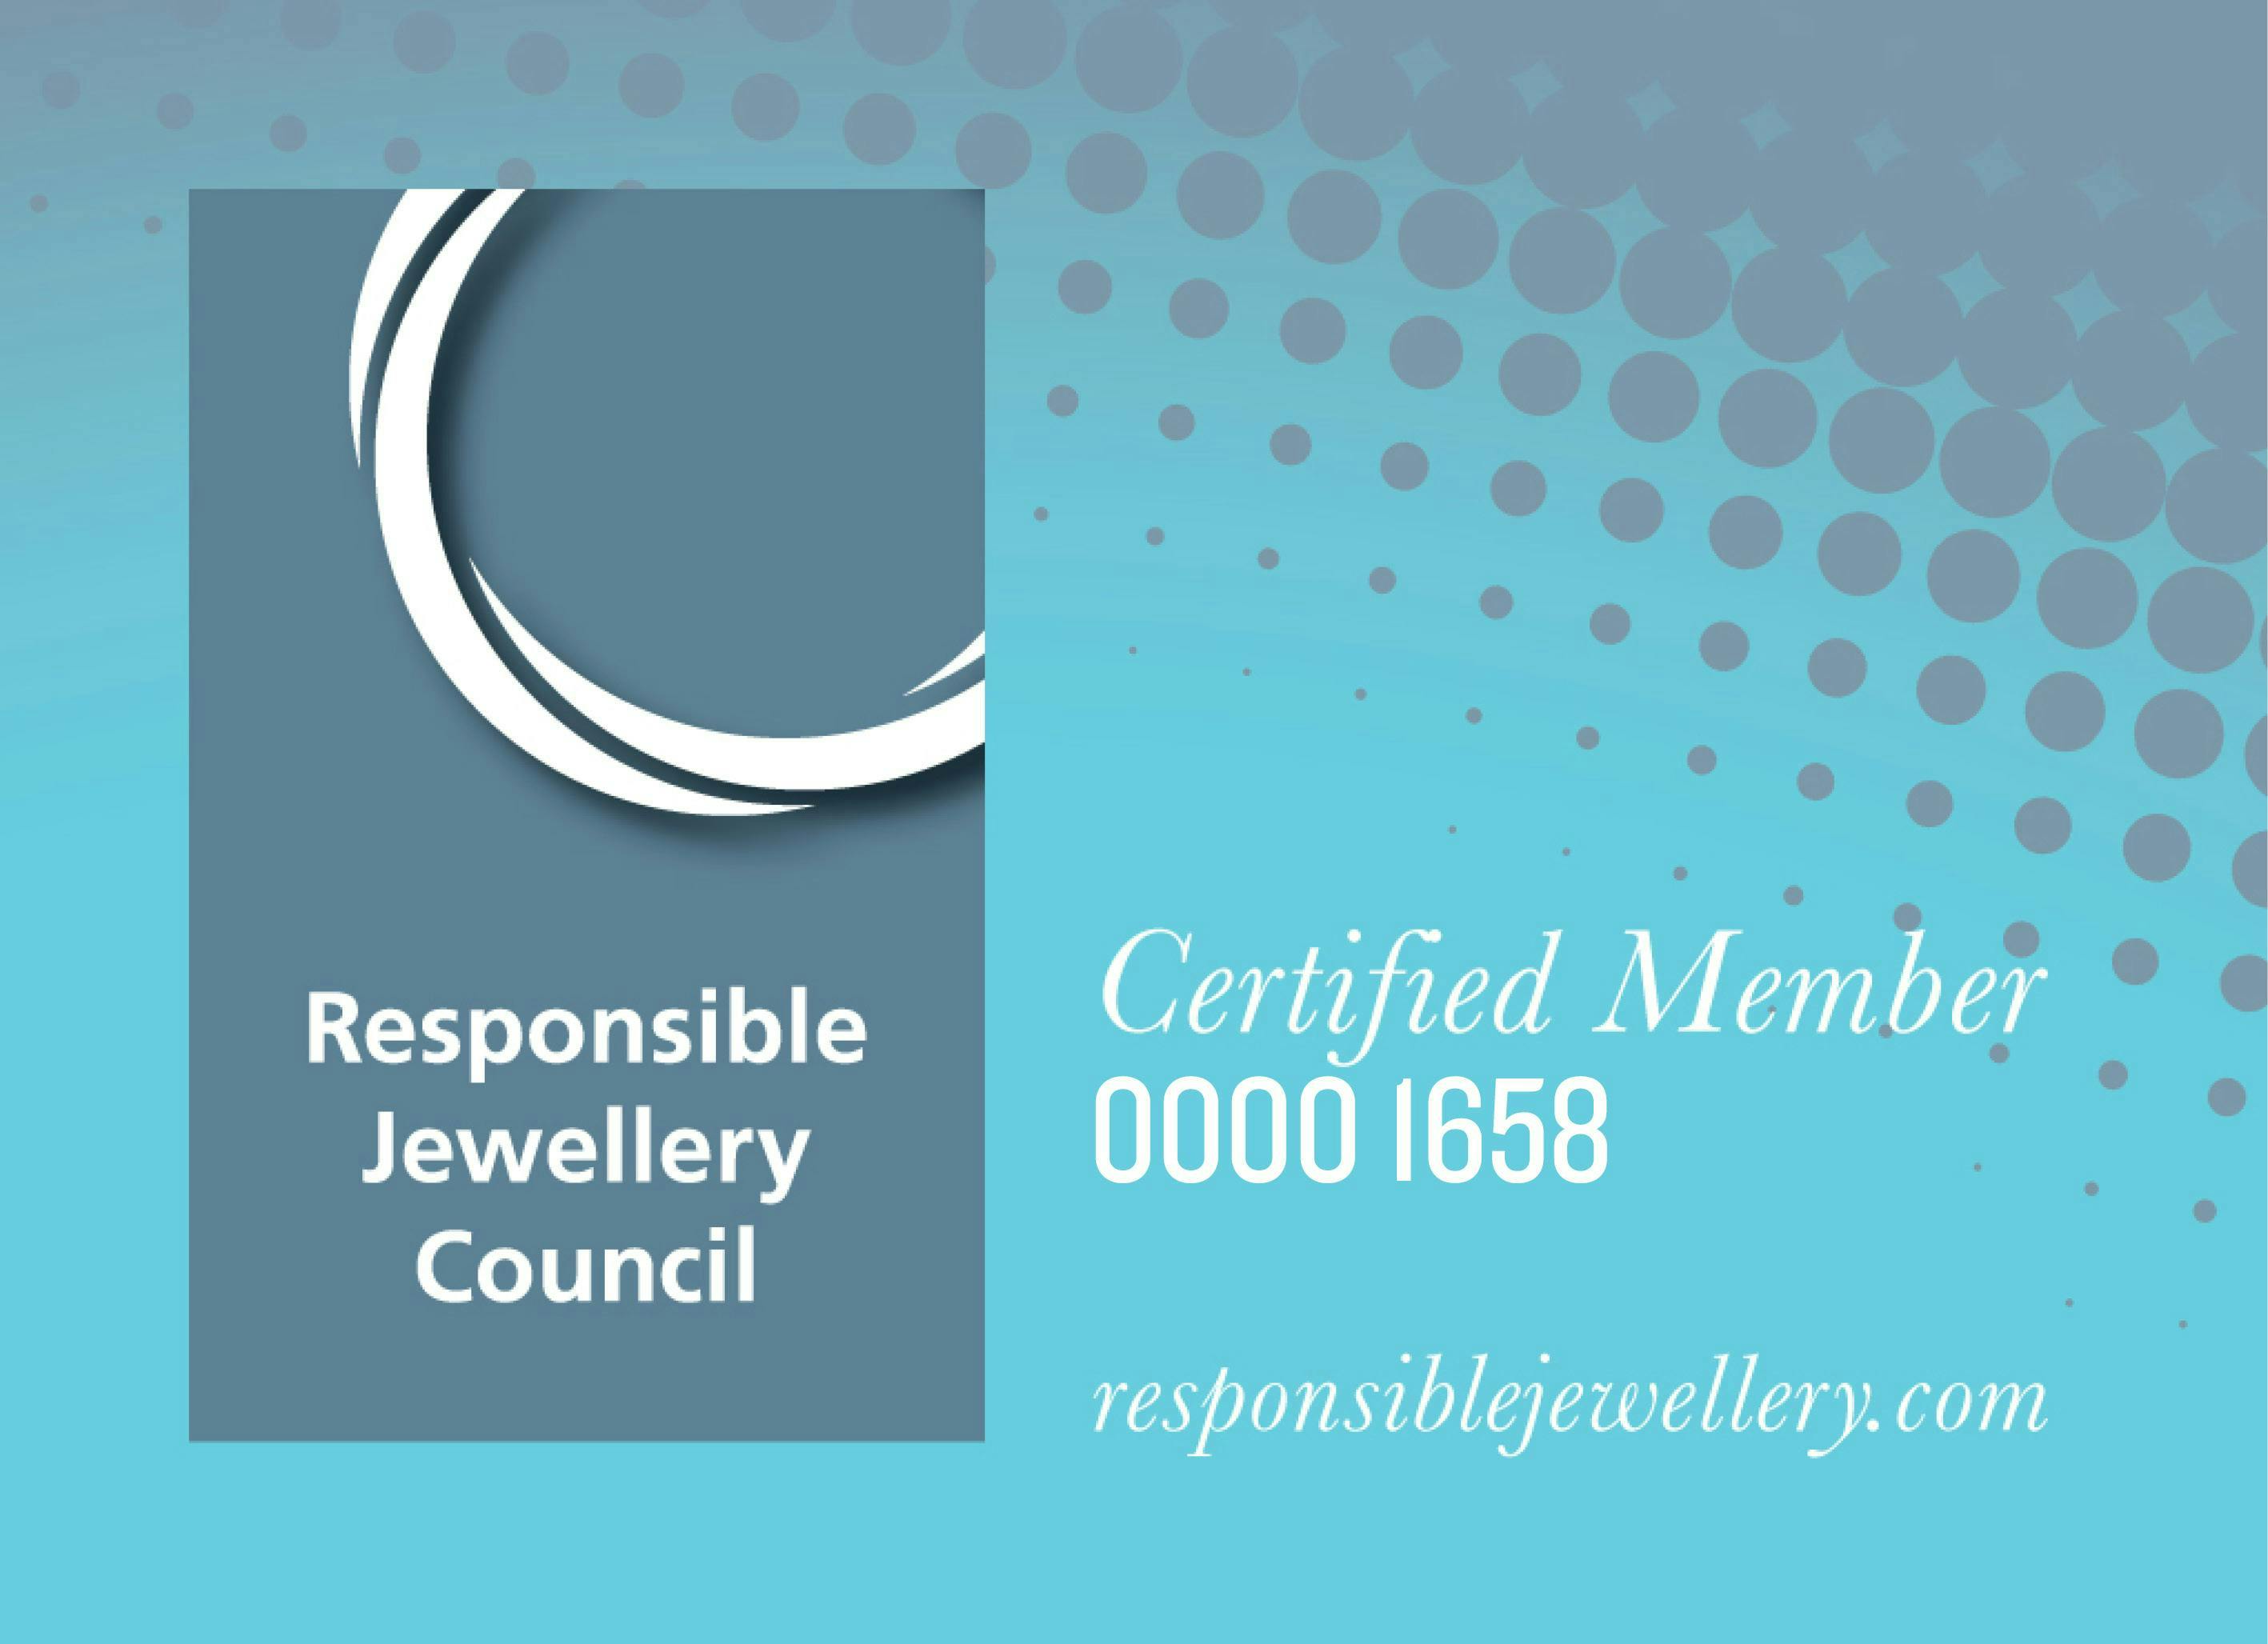 2019 Becomes a member of Responsible Jewellery Council (RJC) certified